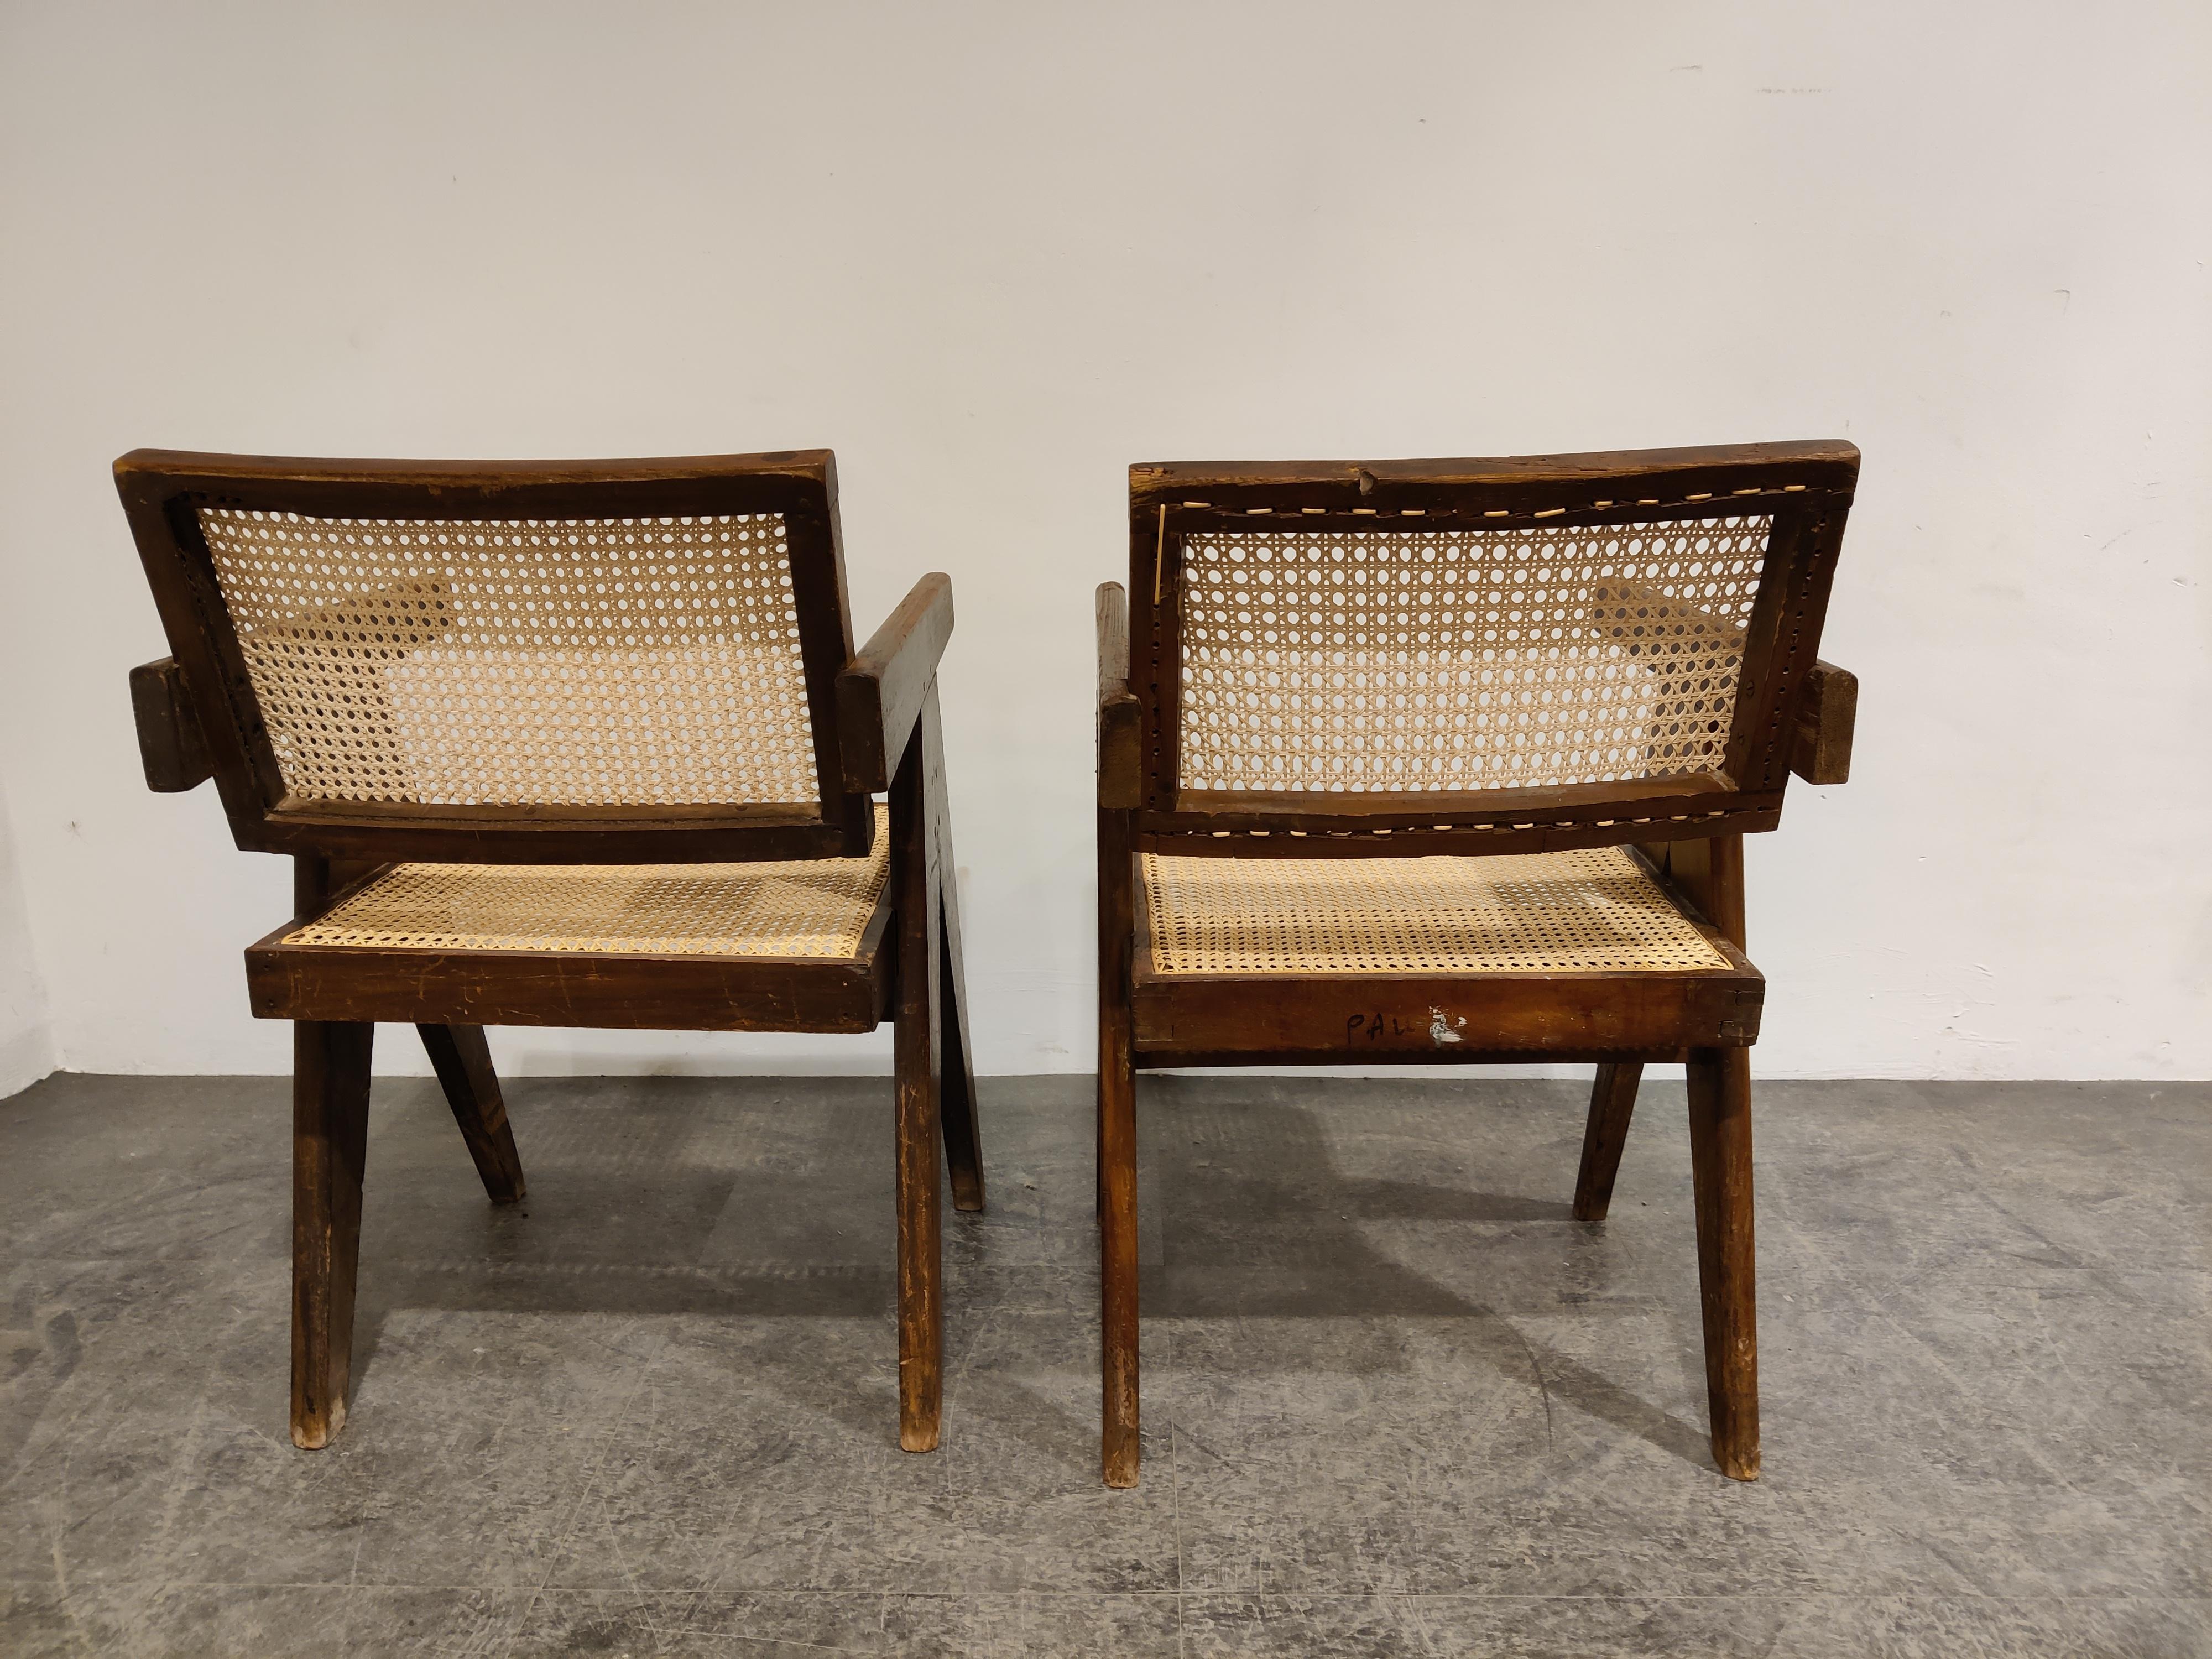 Mid-20th Century Pair of Pierre Jeanneret Chandigarh Office Cane Chairs, 1950s